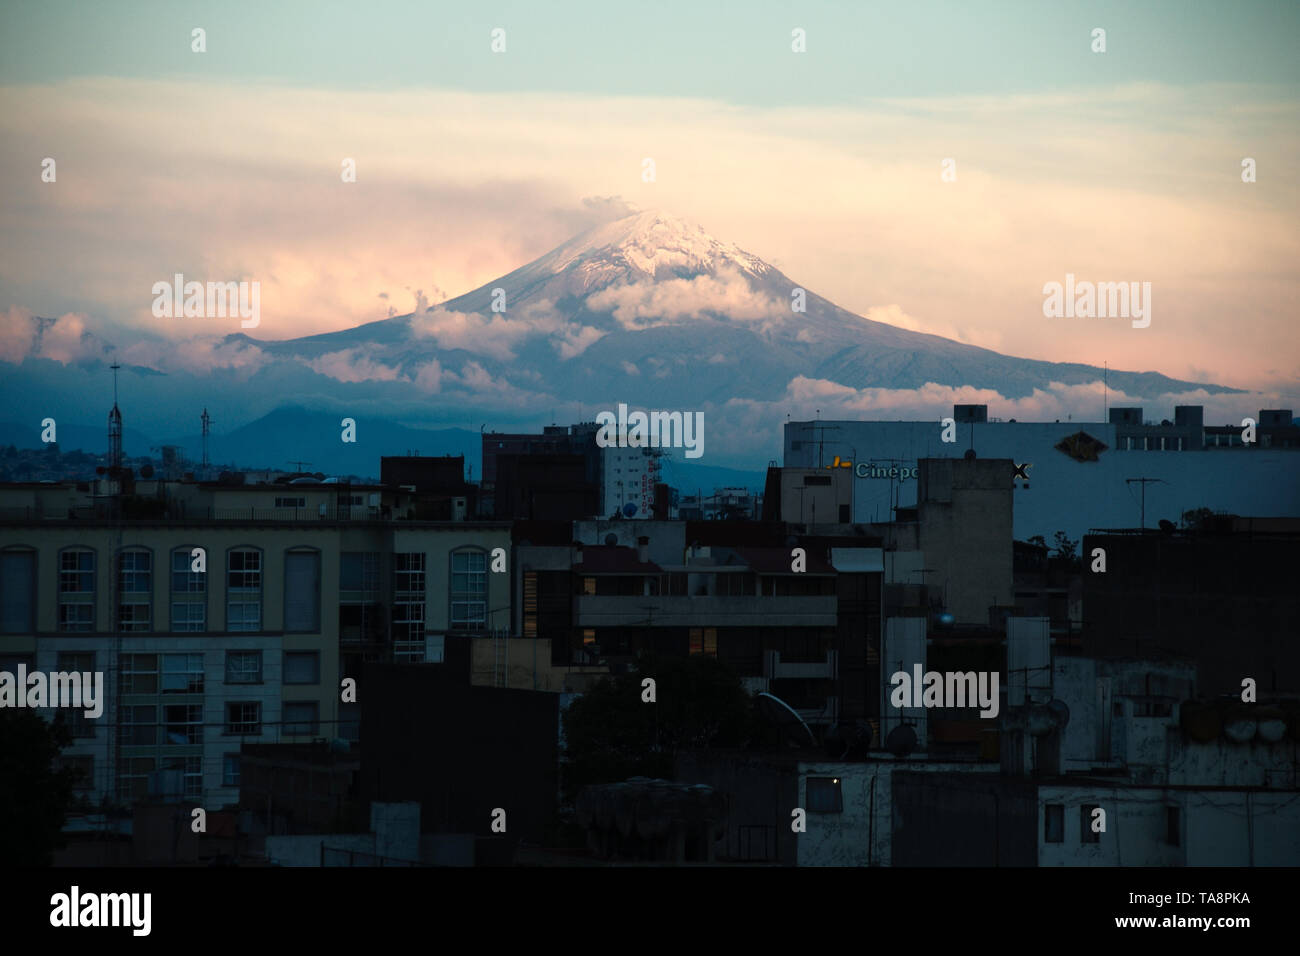 Mexico City, Mexico - 2018: View of Popocatépetl volcano, an active stratovolcano, located in the states of Puebla and Morelos. Stock Photo